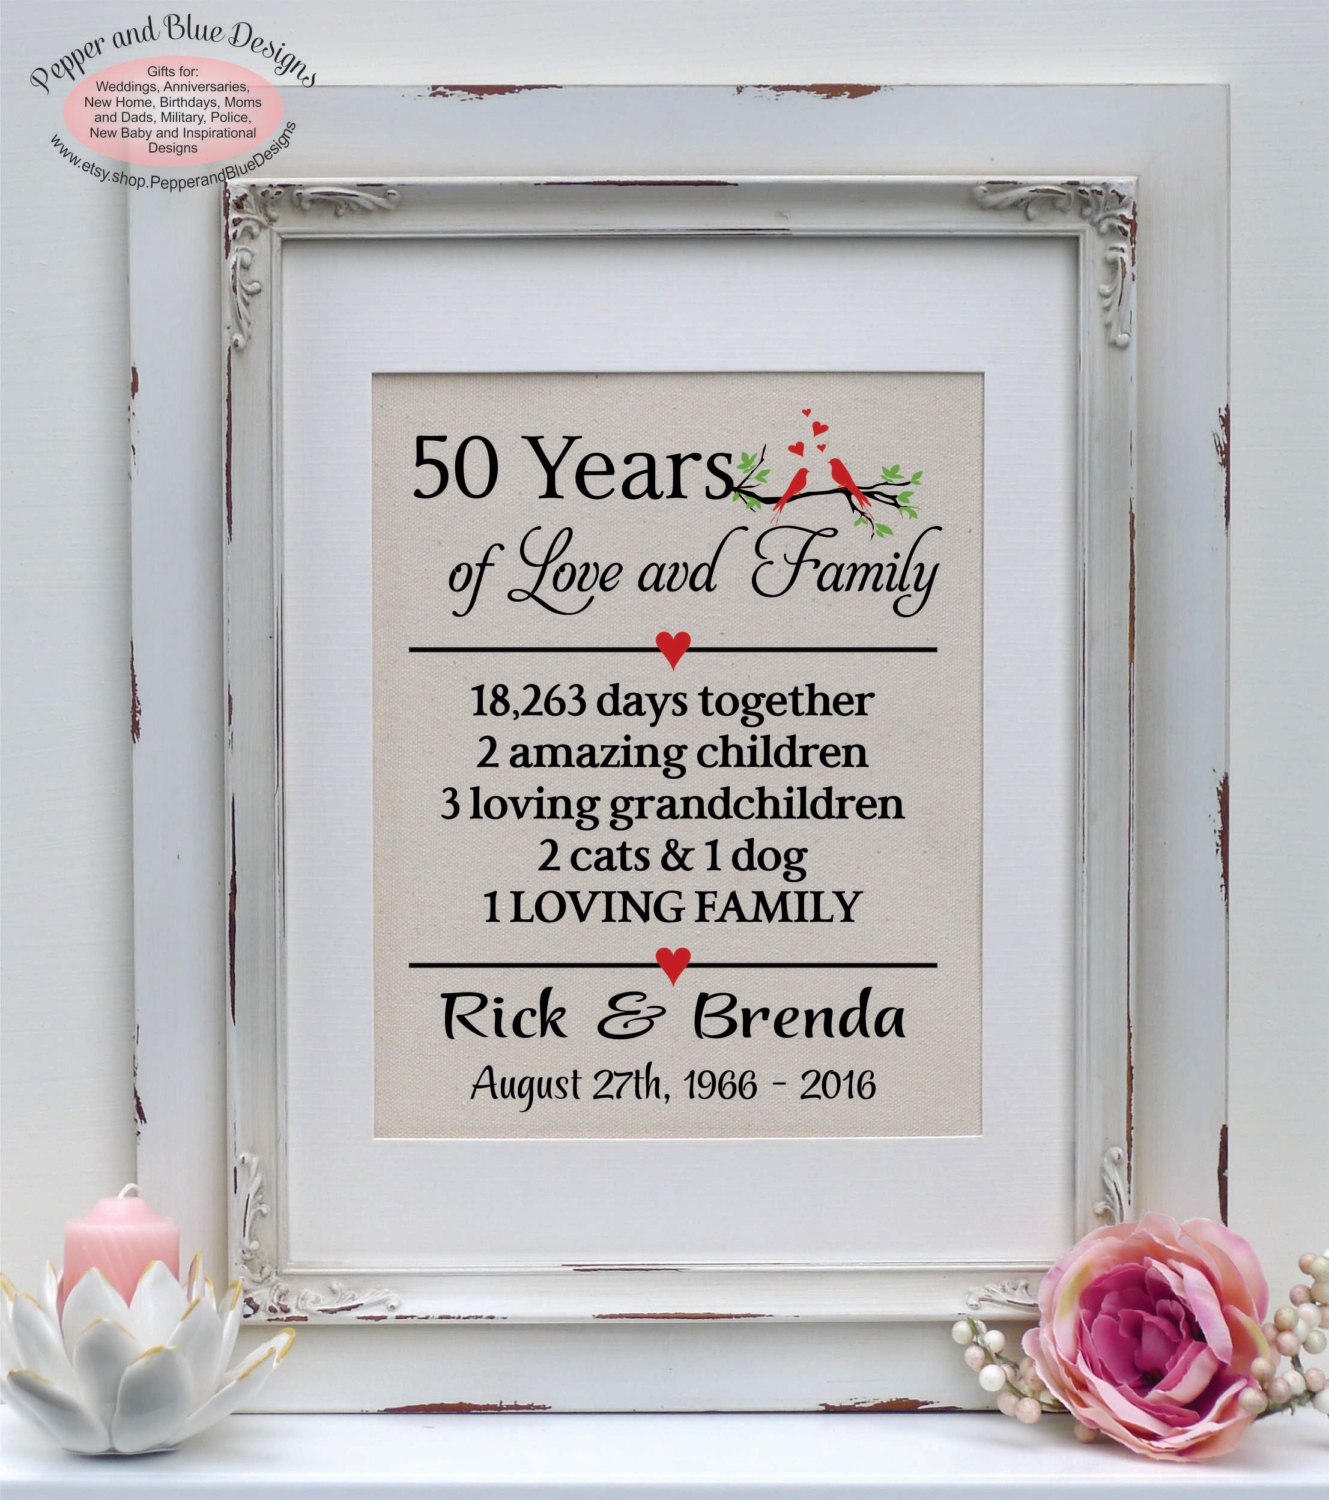 Traditional 50th Wedding Anniversary Gifts
 50th Anniversary Gift For Parents Anniversary Gift for